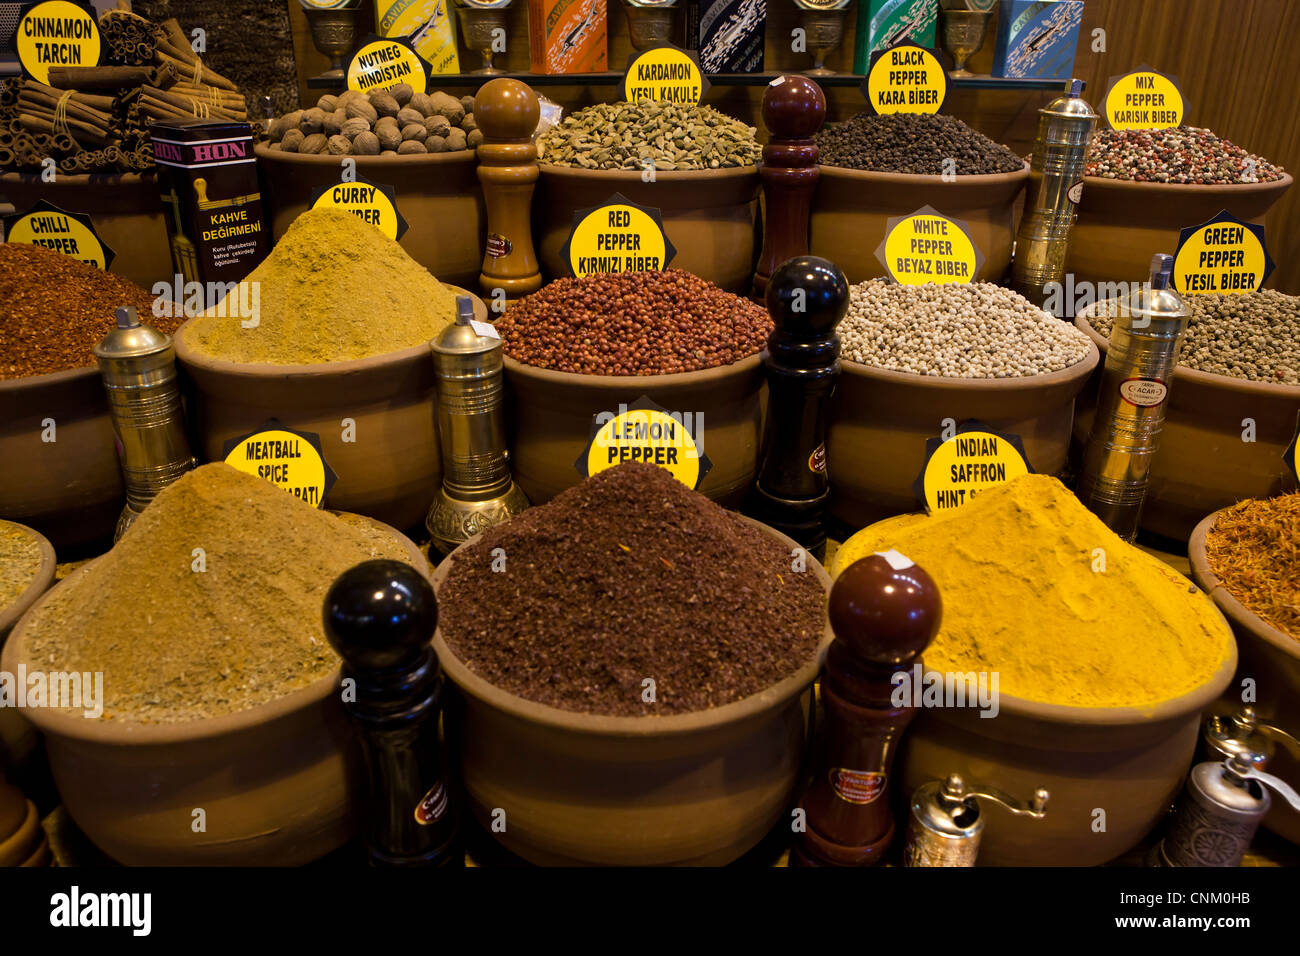 Turkish spices and herbs at the Egyptian Bazaar, Istanbul, Turkey Stock Photo